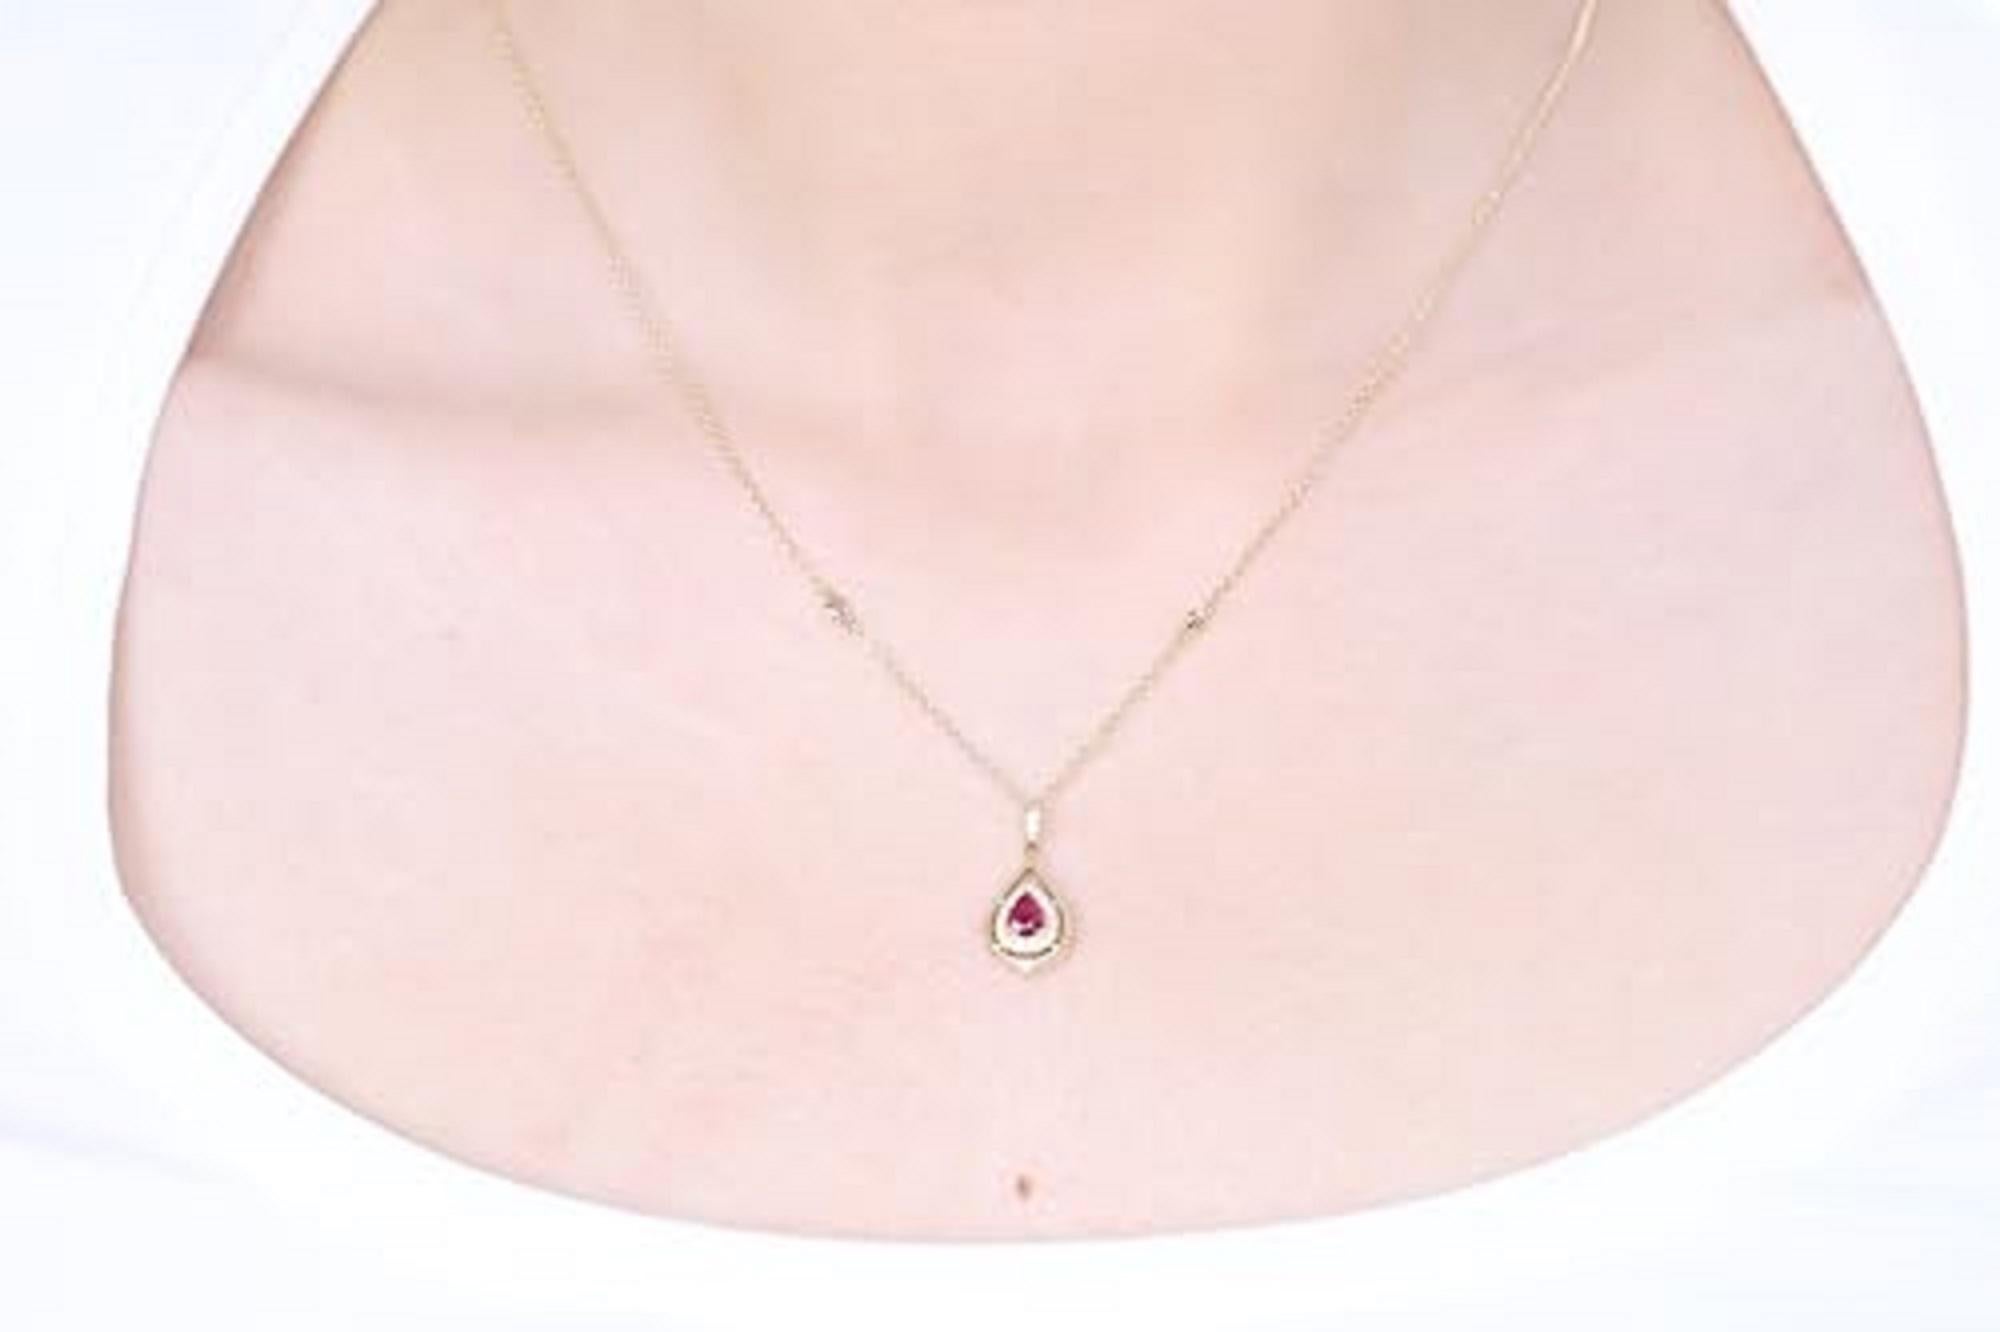 Decorate yourself in elegance with this Pendant is crafted from 14-karat Yellow Gold by Gin & Grace Pendant. This Pendant is made up of 4*5 Pear-cut Prong setting ruby (1 Pcs) 0.35 Carat and Round-Cut Prong setting White Diamond (20 Pcs) 0.16 Carat.